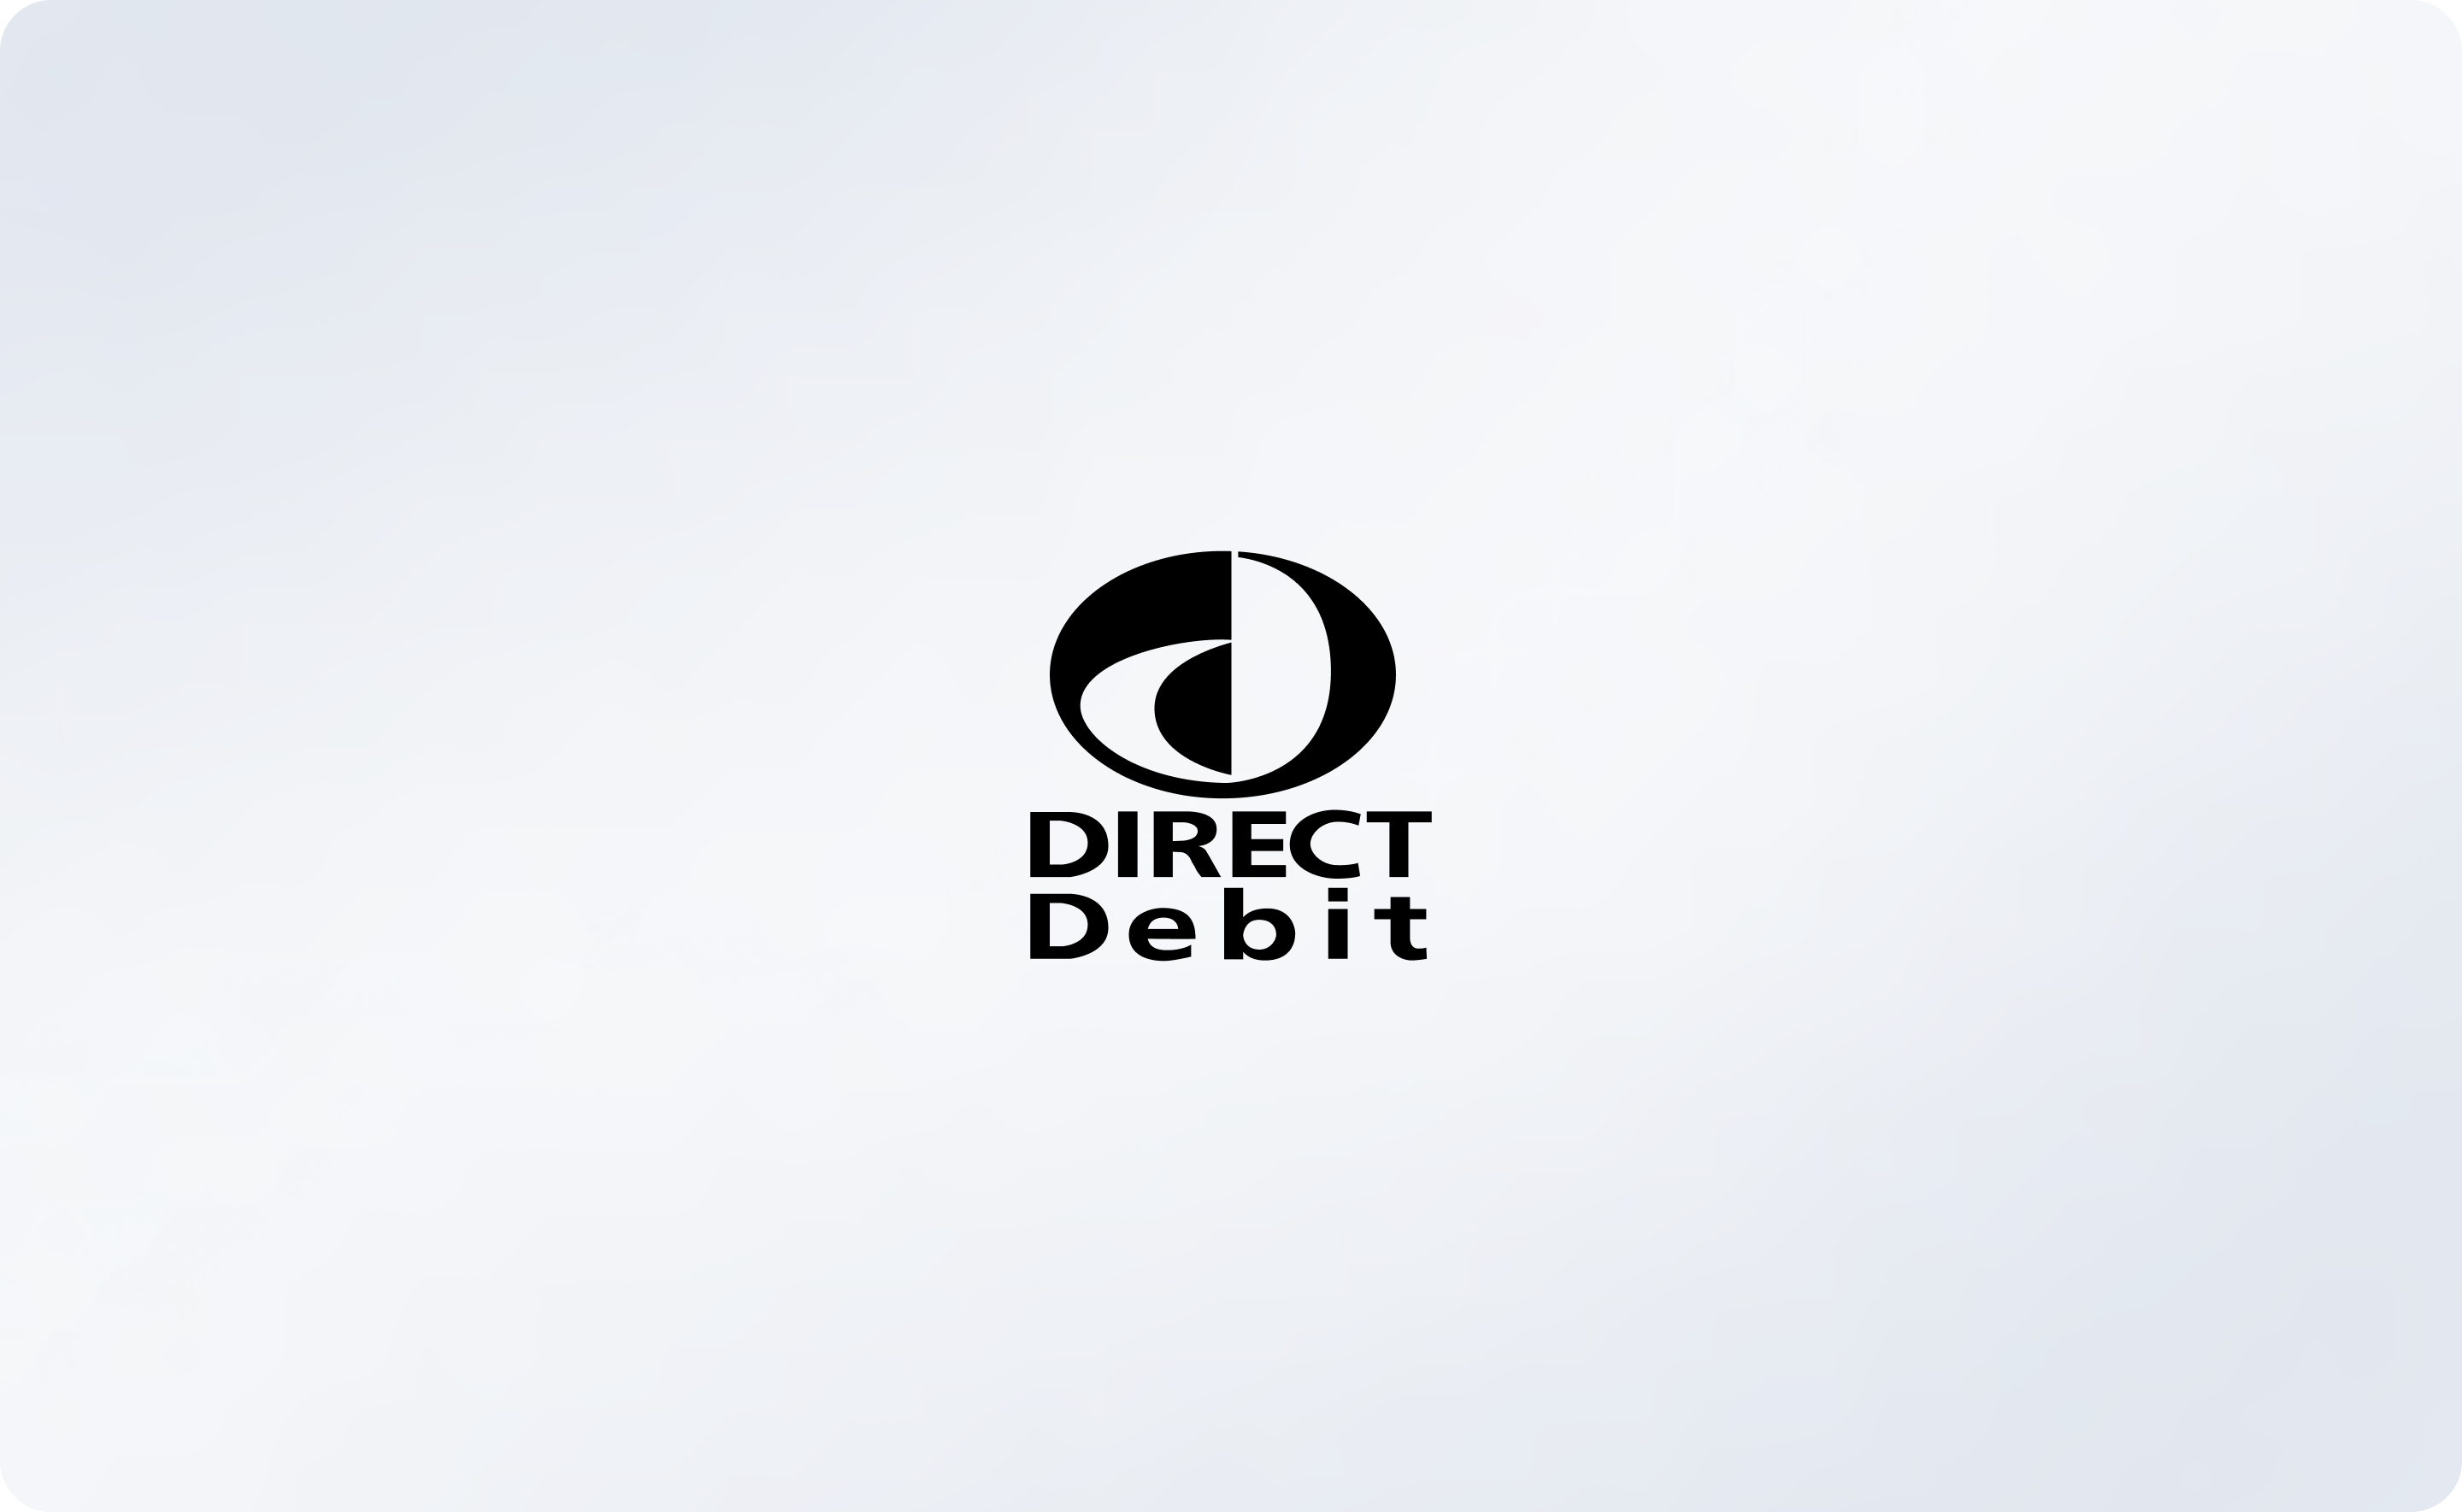 Creating a Direct Debit test account